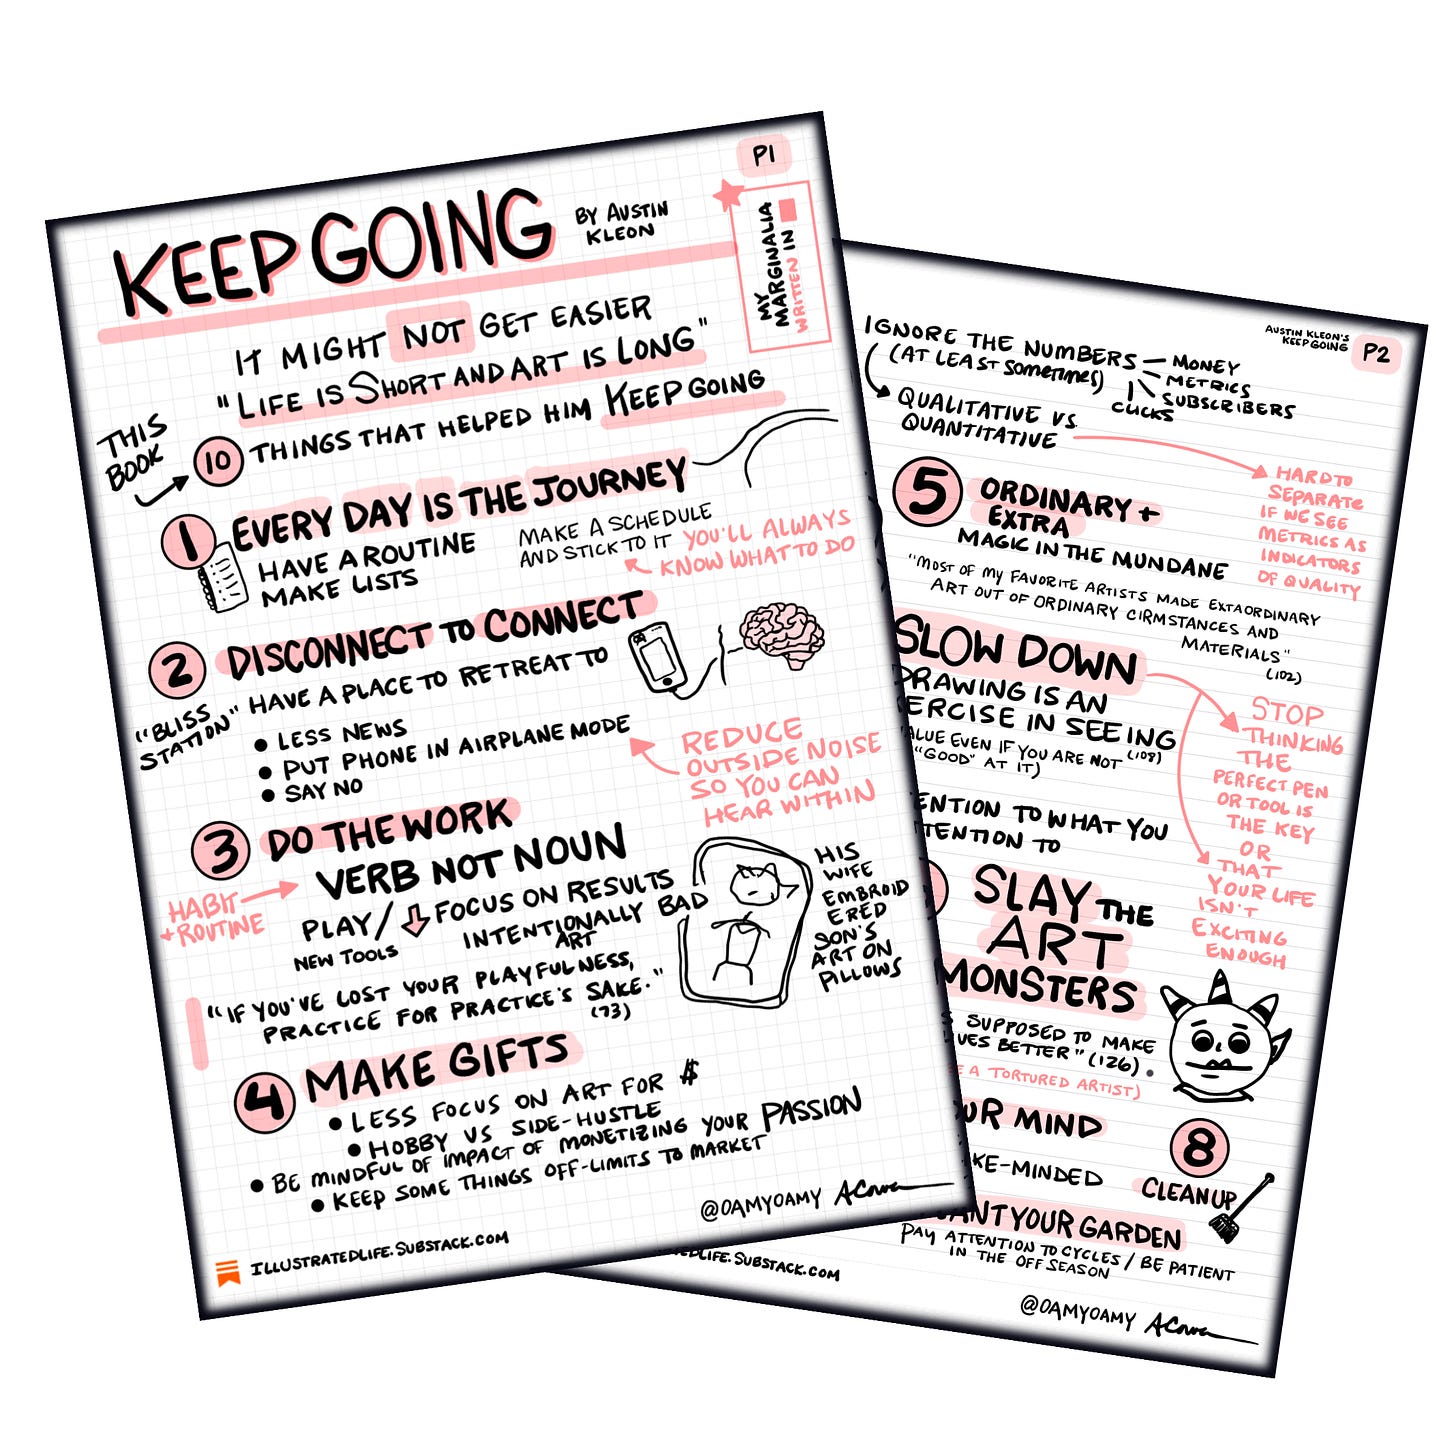 Stacked look at 2-page sketchnote of Keep Going by Austin Kleon